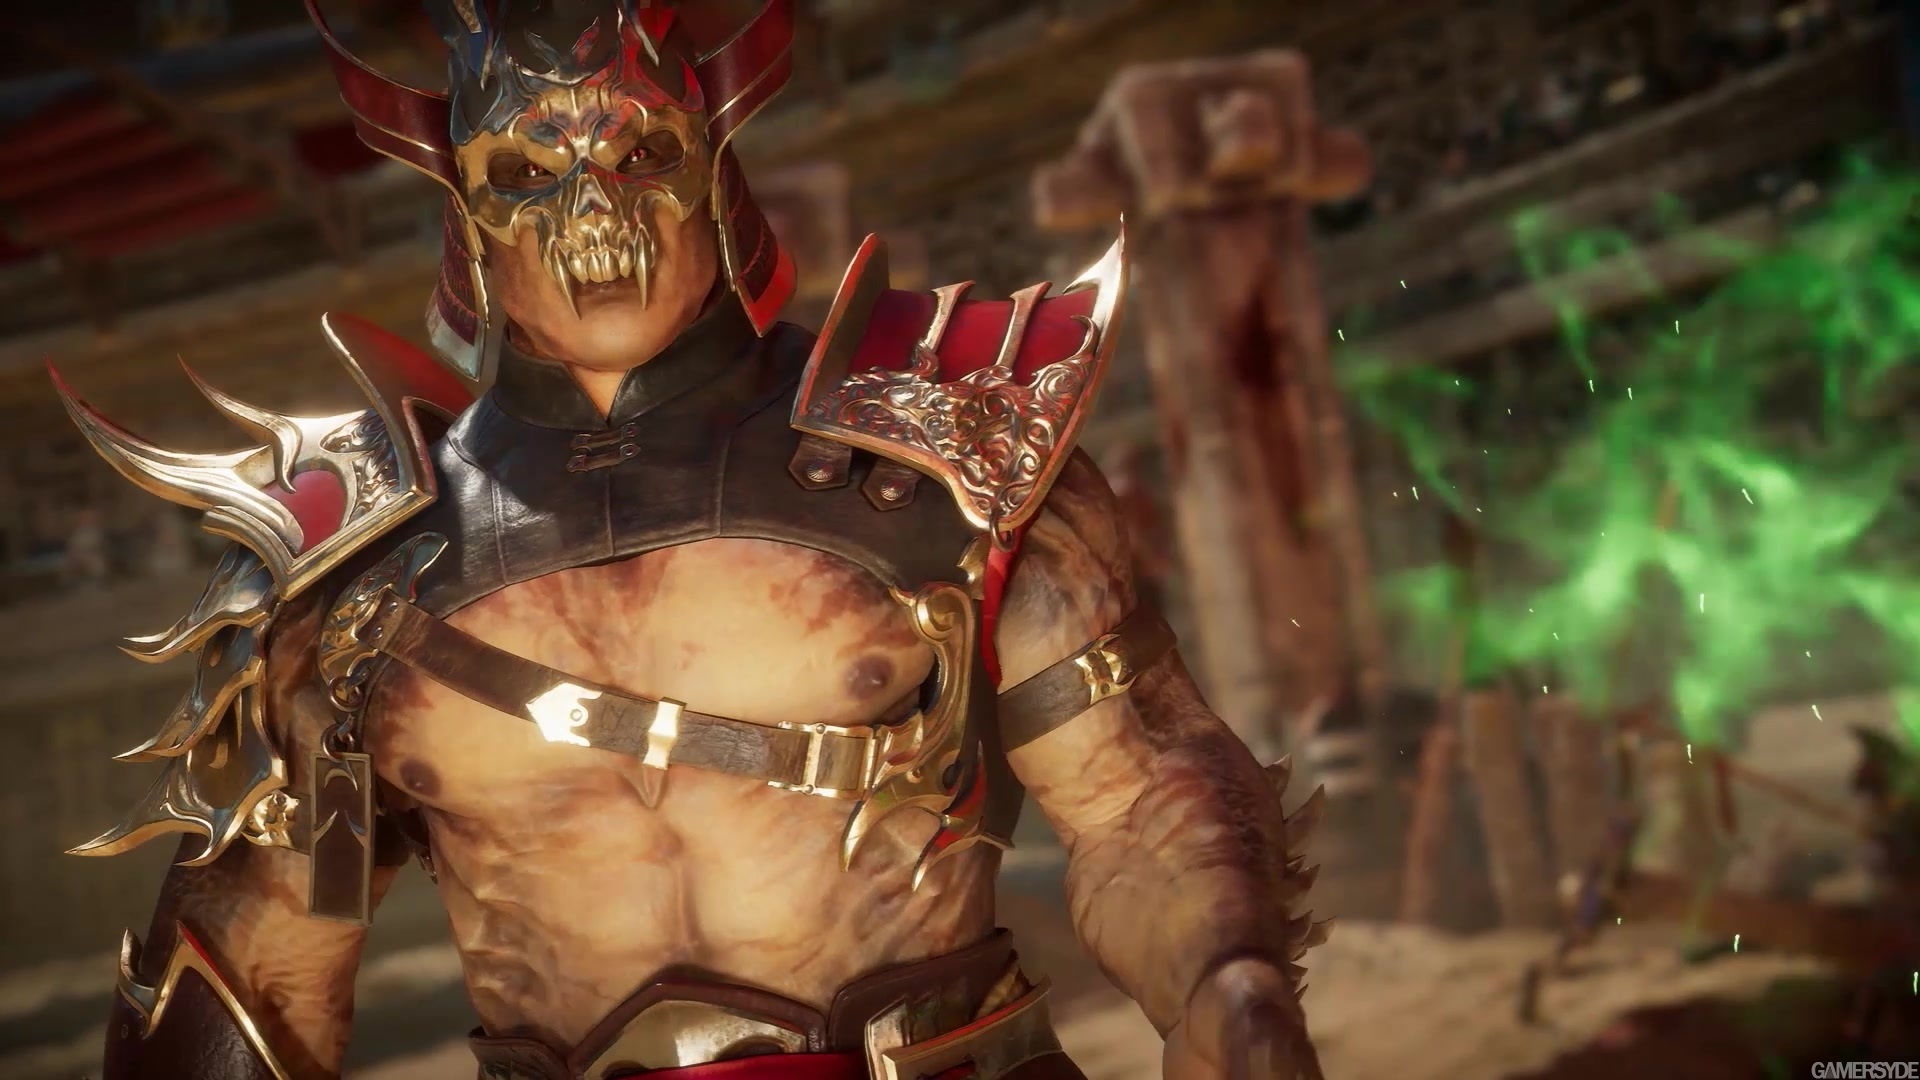 Shao Kahn Reigns Supreme In The Latest Mortal Kombat 11 Character Trailer